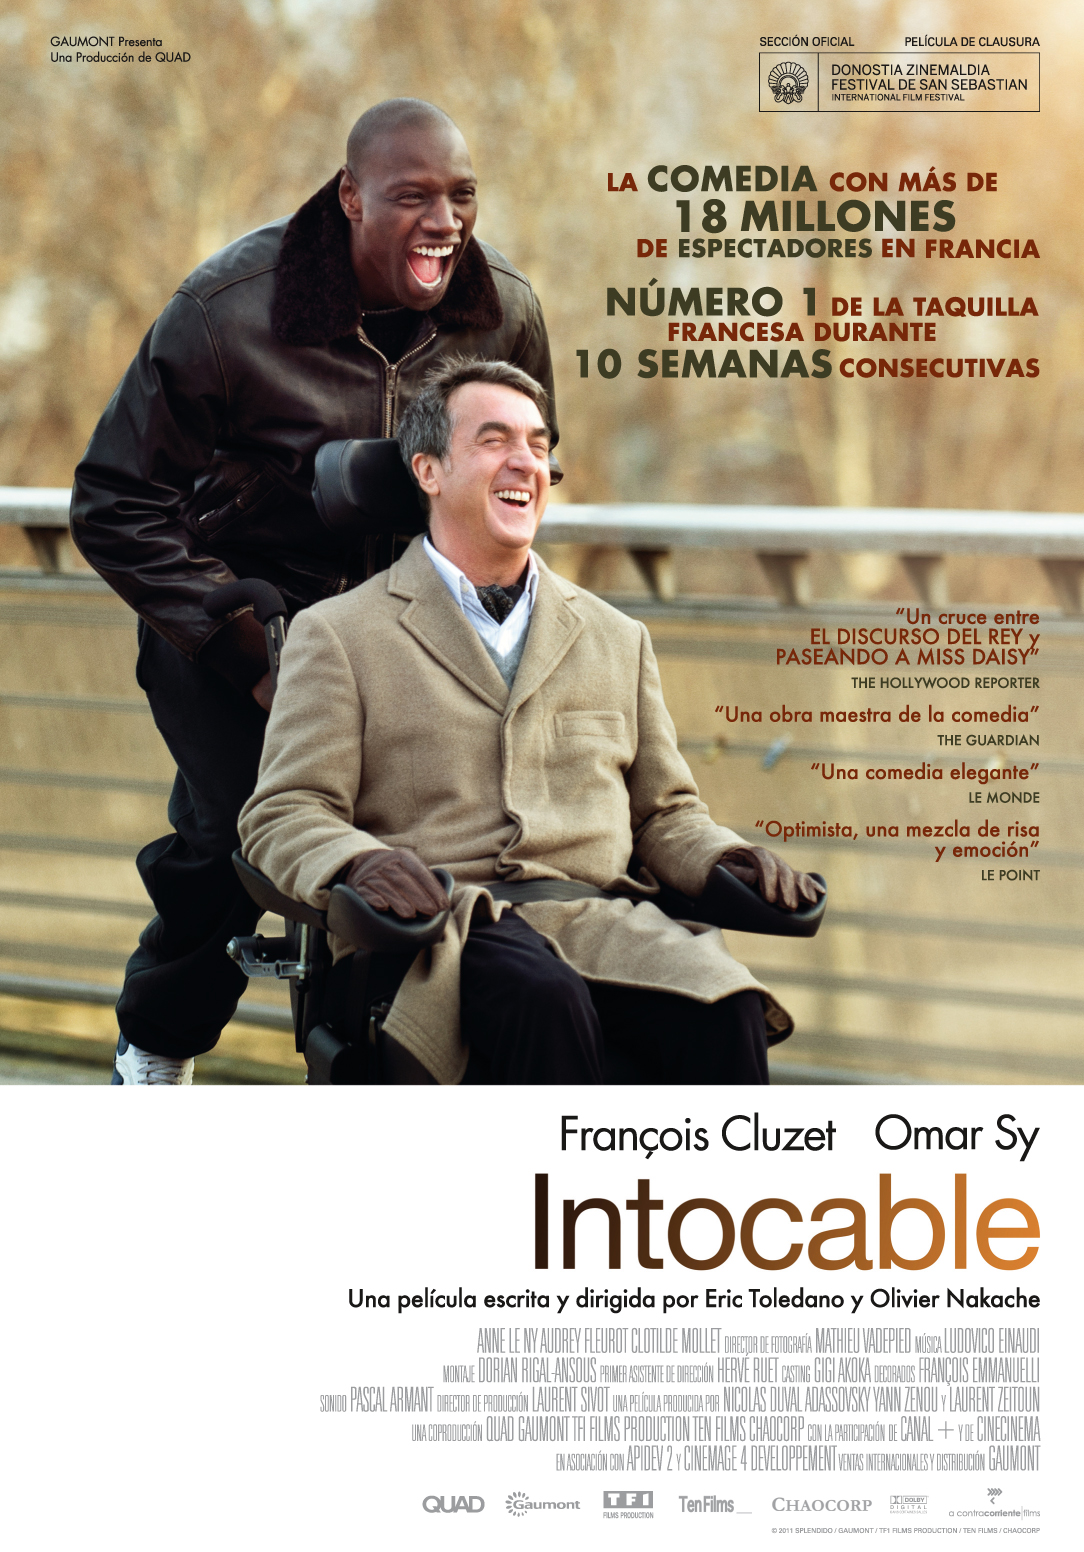 http://3.bp.blogspot.com/-Ud9KYqOCZDY/UMqUEDkCiKI/AAAAAAAAVpE/Rpy3XsnzK-g/s1600/intocable-poster.jpg